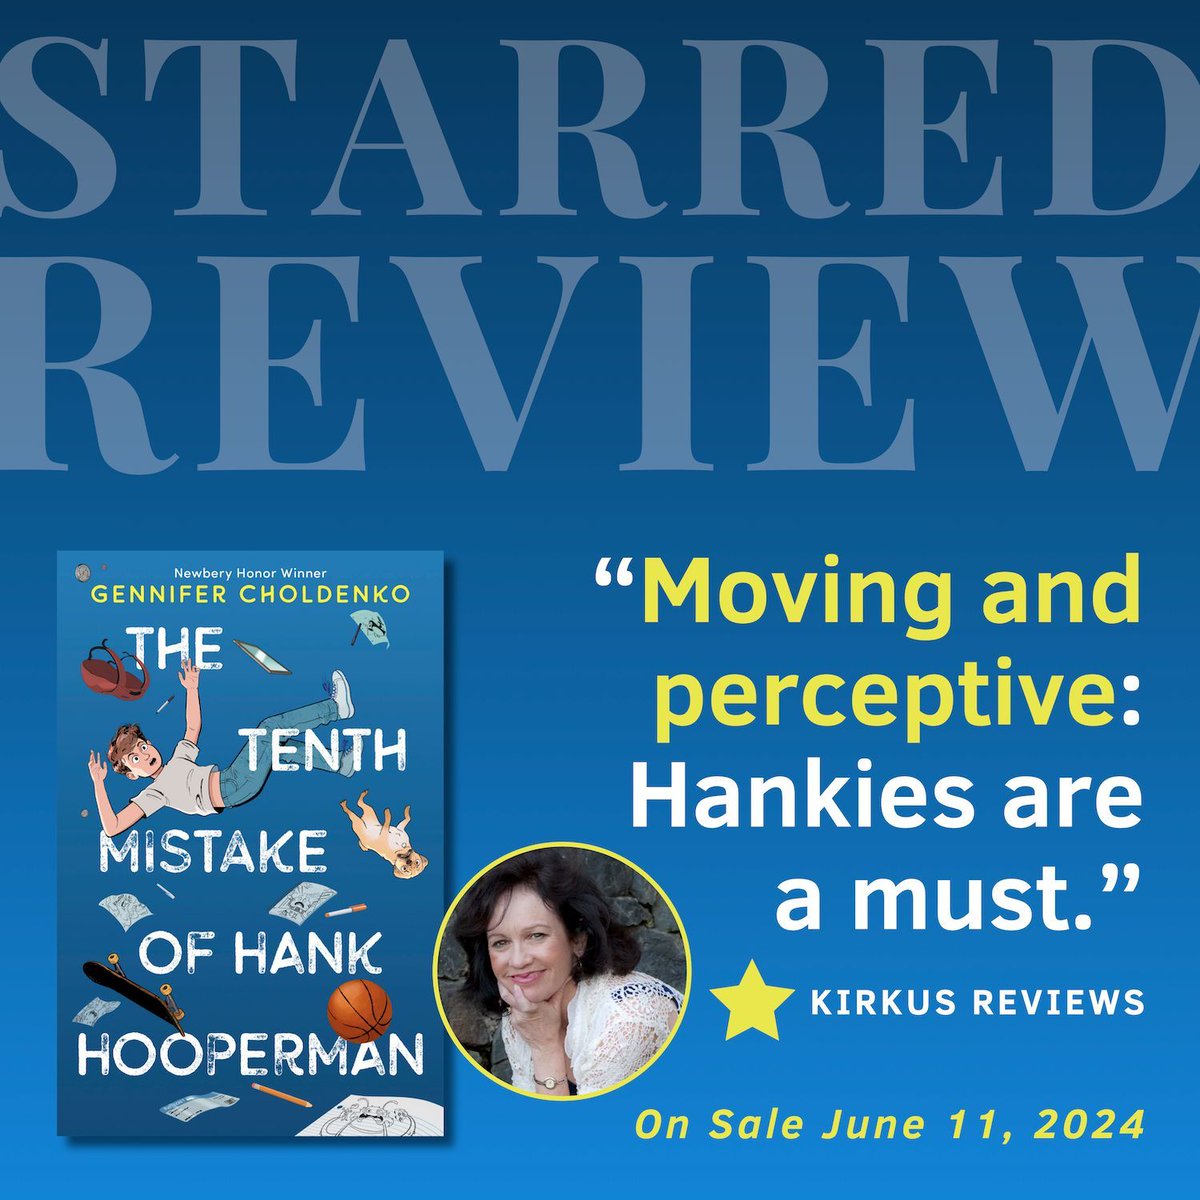 What an honor: the first review for my new #mglit novel, THE TENTH MISTAKE OF HANK HOOPERMAN, is starred from @KirkusReviews! ⭐️ I can't wait to share this book with you on June 11 and hear what you think. 💙 penguinrandomhouse.com/books/551520/t… @KnopfBFYR @randomhousekids